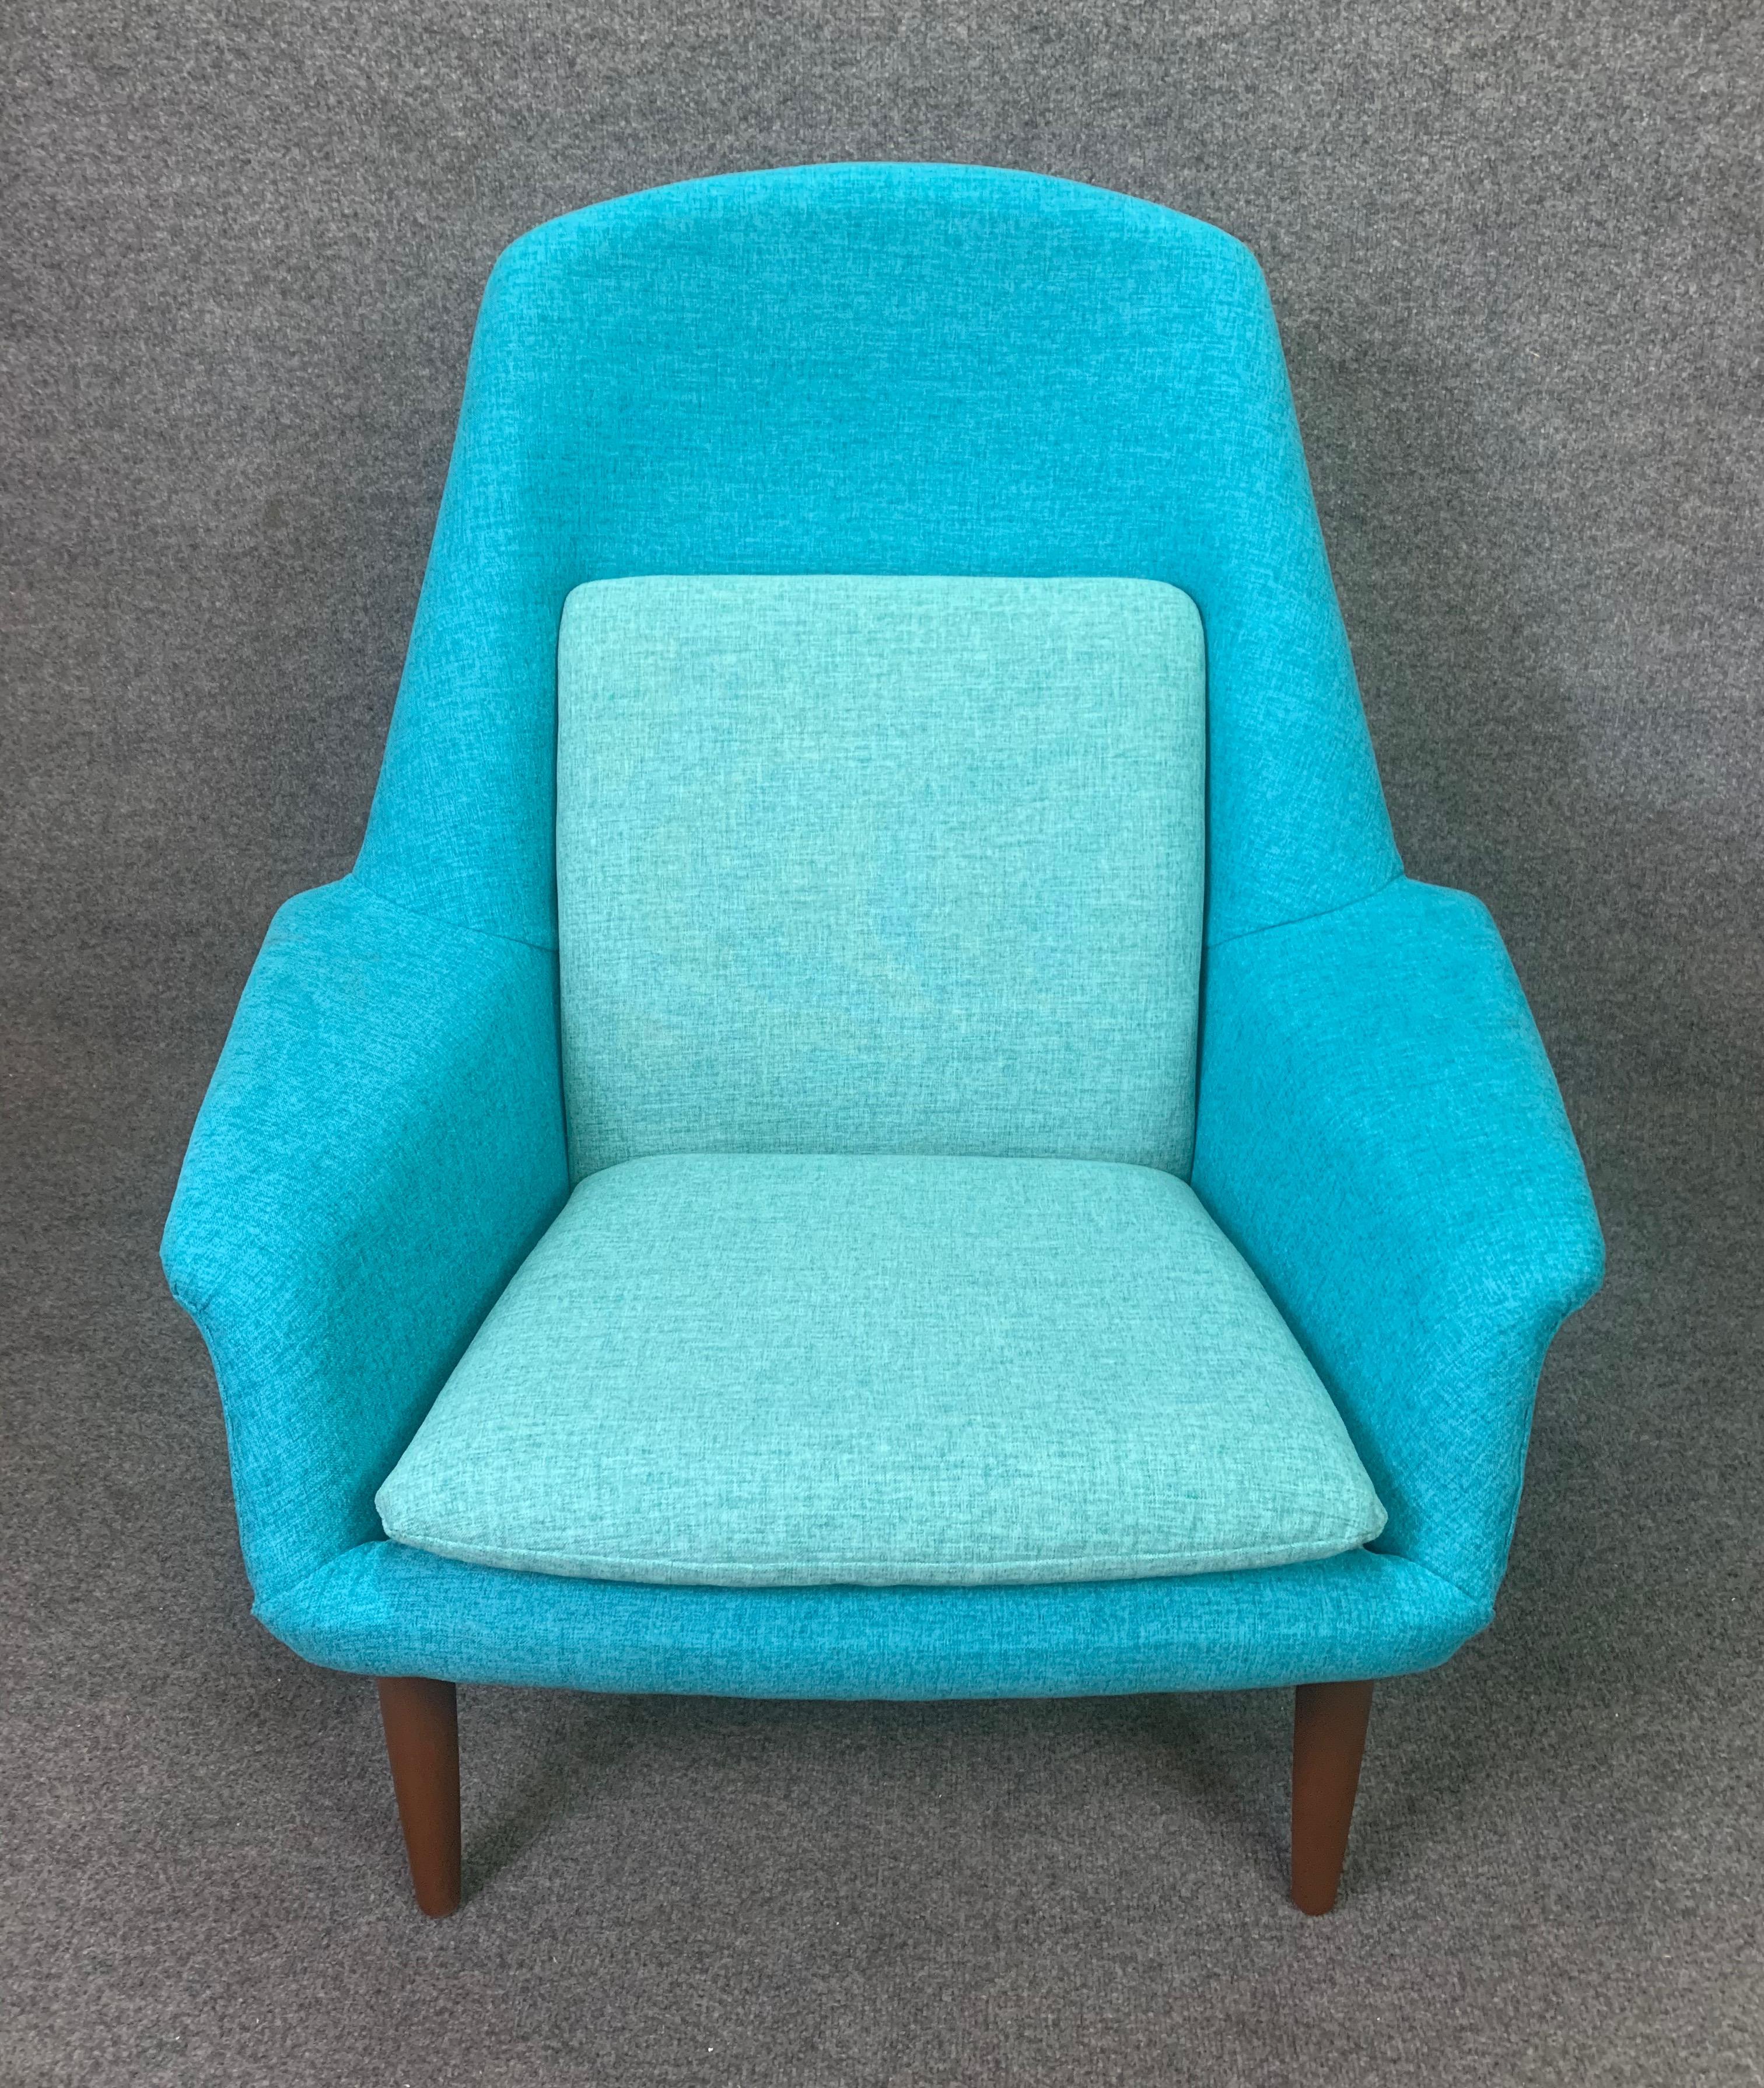 Hand-Crafted Vintage Scandinavian Mid-Century Modern Lounge Chair by Broderna Anderssons For Sale